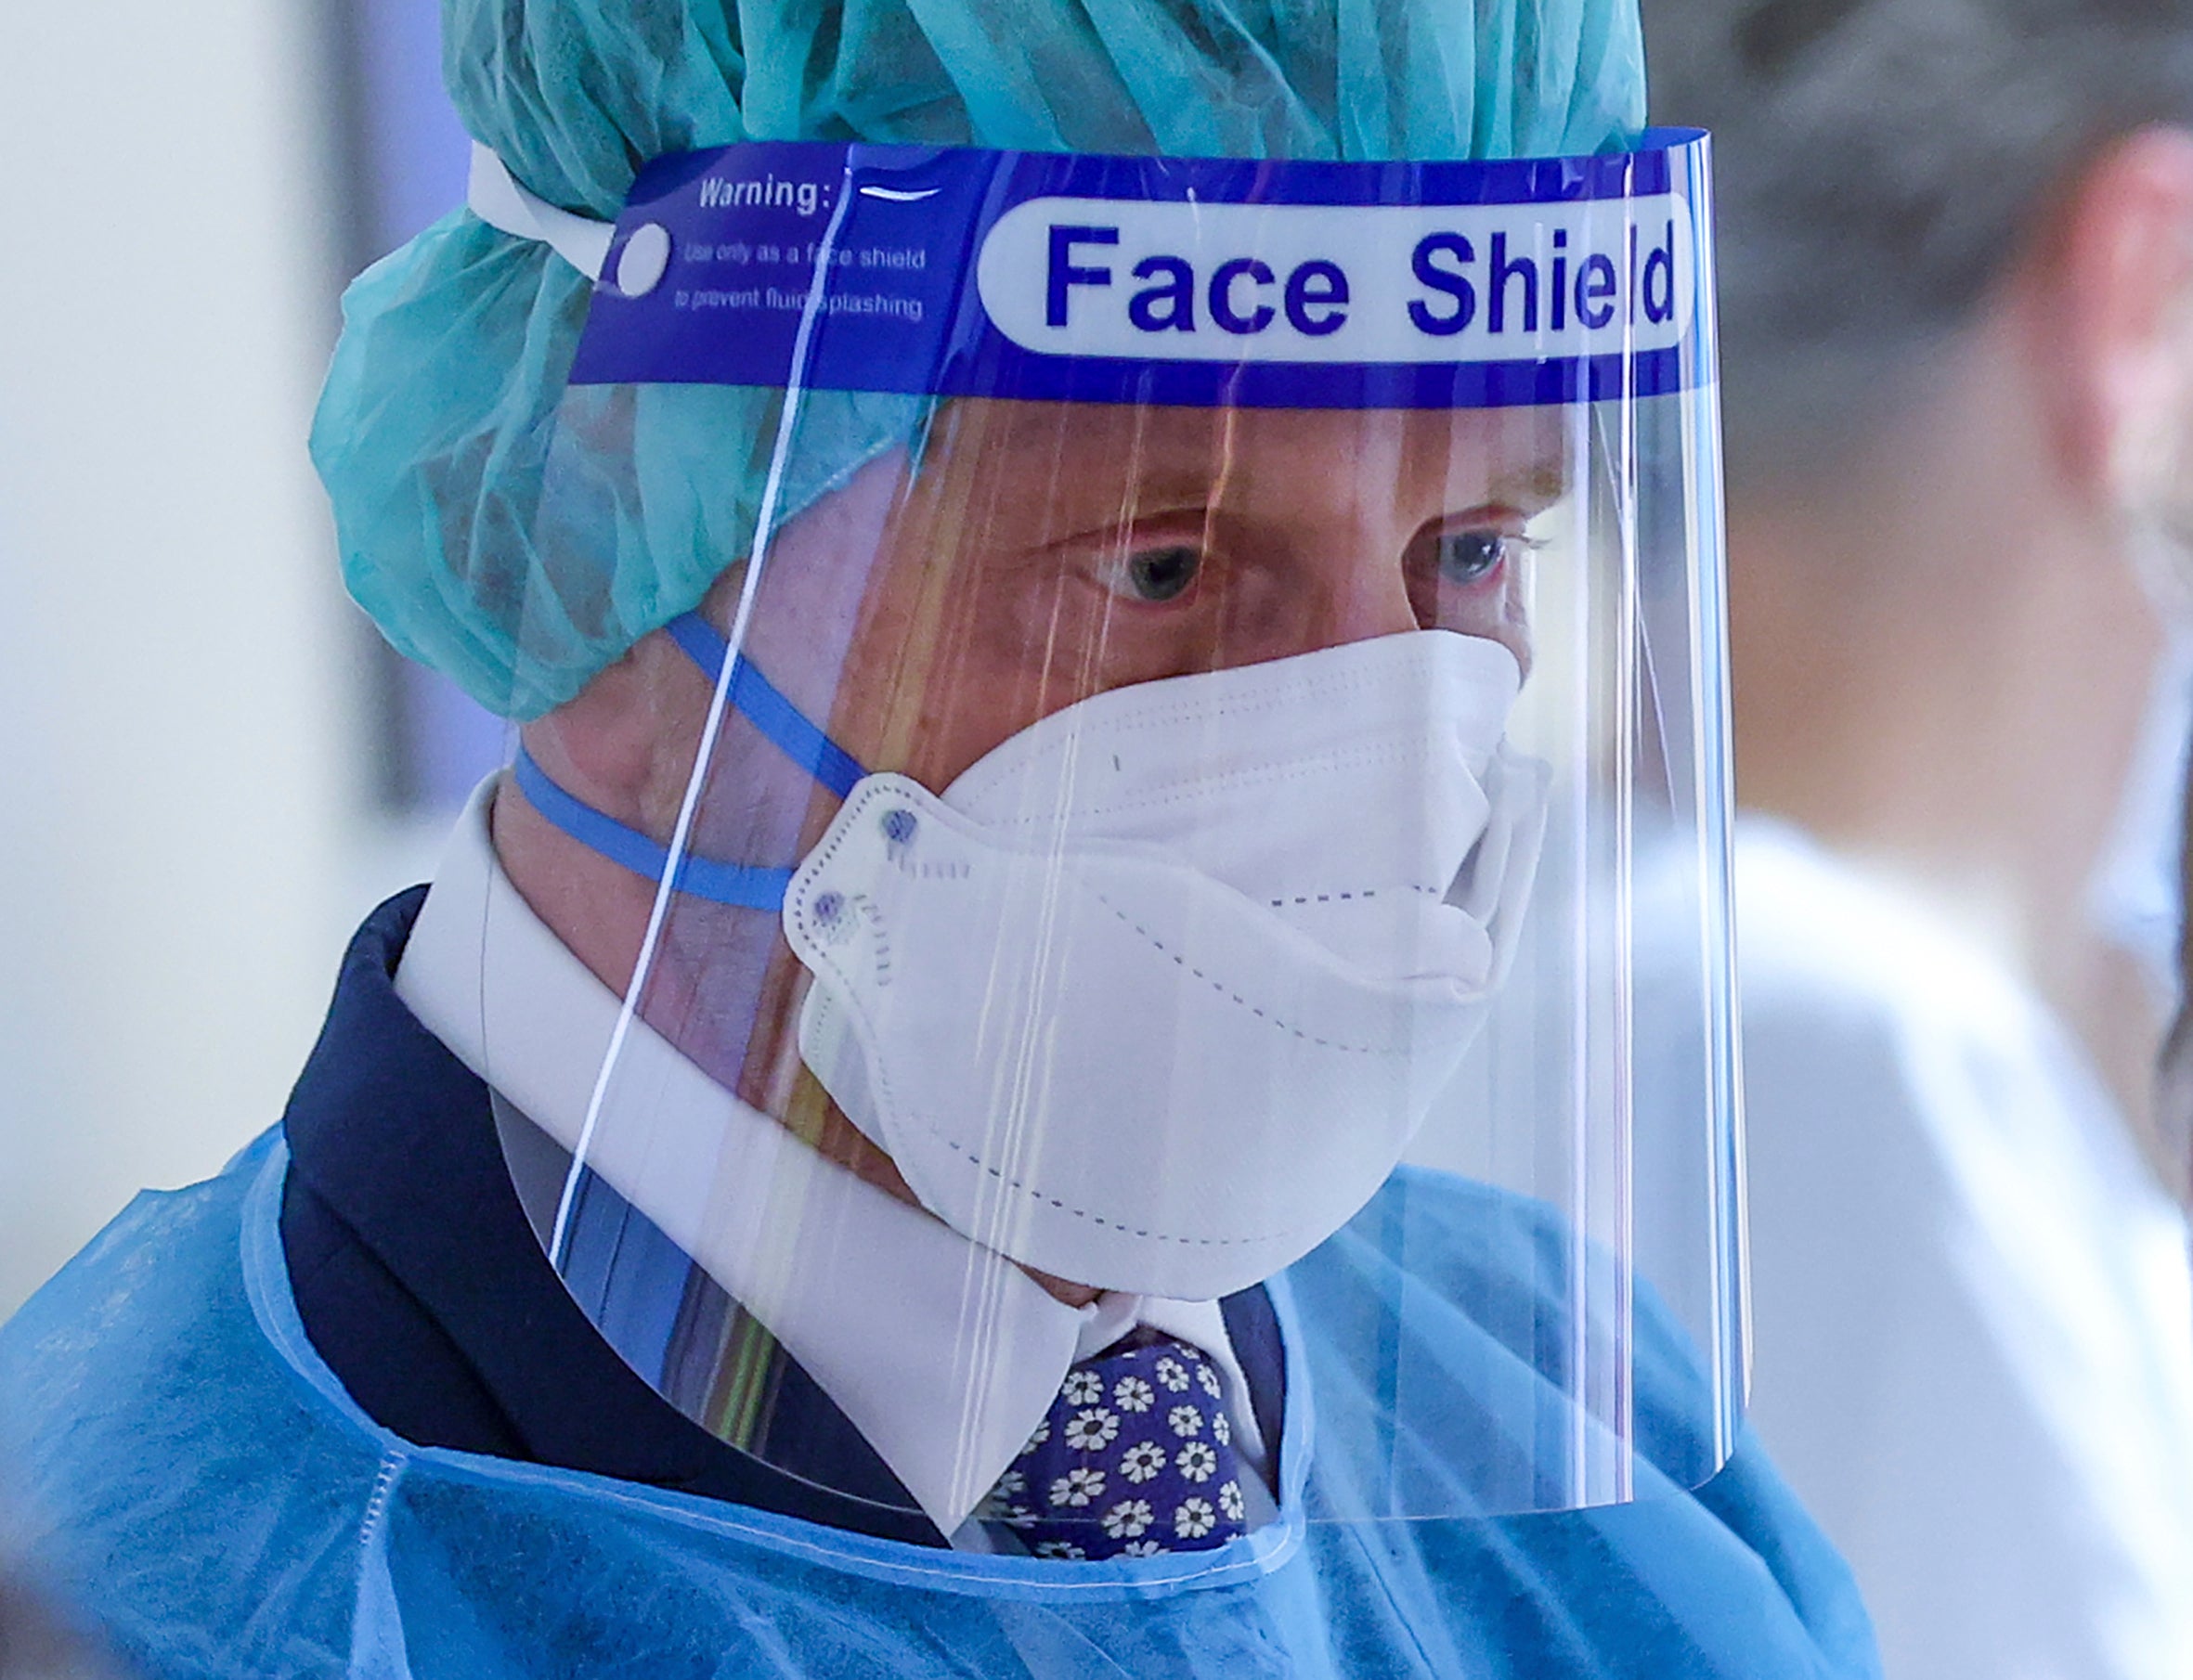 Michael Kretschmer, Prime Minister of Saxony, wearing a mask and face shield, visits the Covid standard ward at Leipzig University Hospital